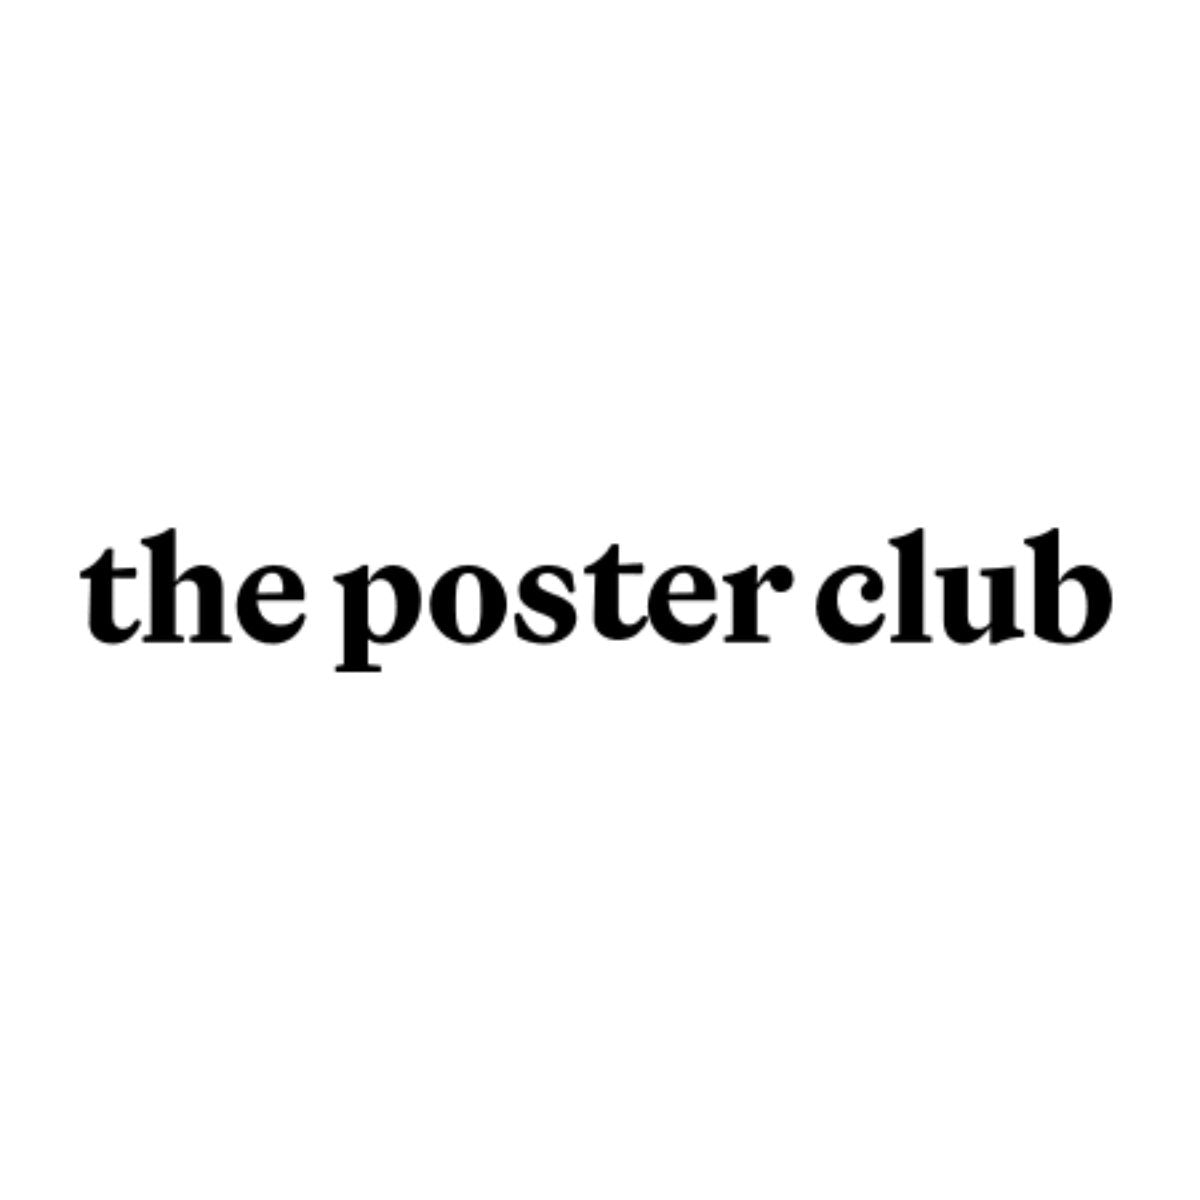 THE POSTER CLUB